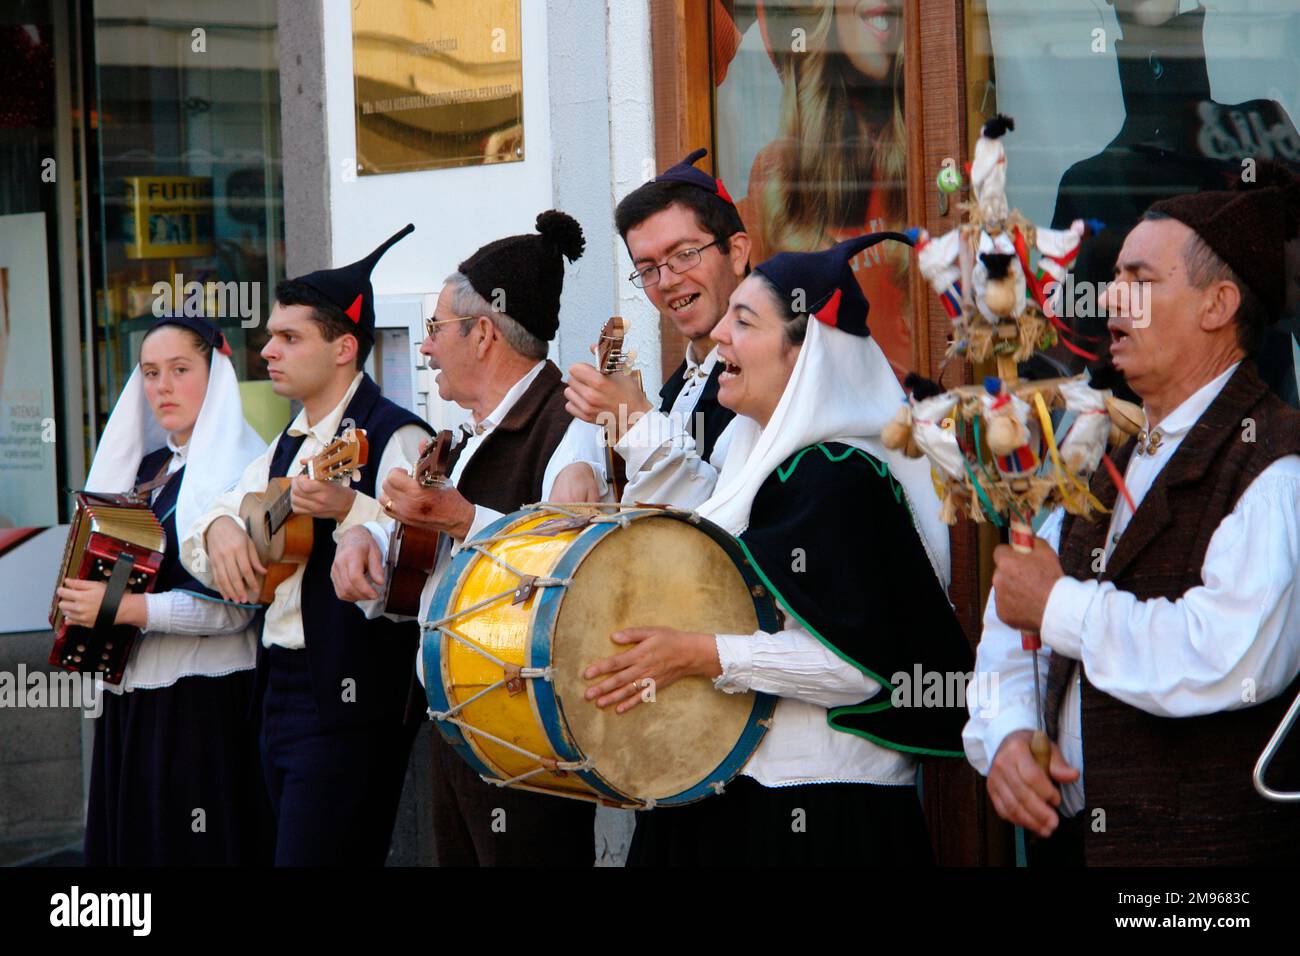 A traditional Boa Nova folk group playing musical instruments and singing, seen in Funchal, the capital city of Madeira.  The man on the right is holding a percussion instrument known as a brinquinho, a stick decorated with wooden dolls, bells and castanets, which is shaken up and down. Stock Photo